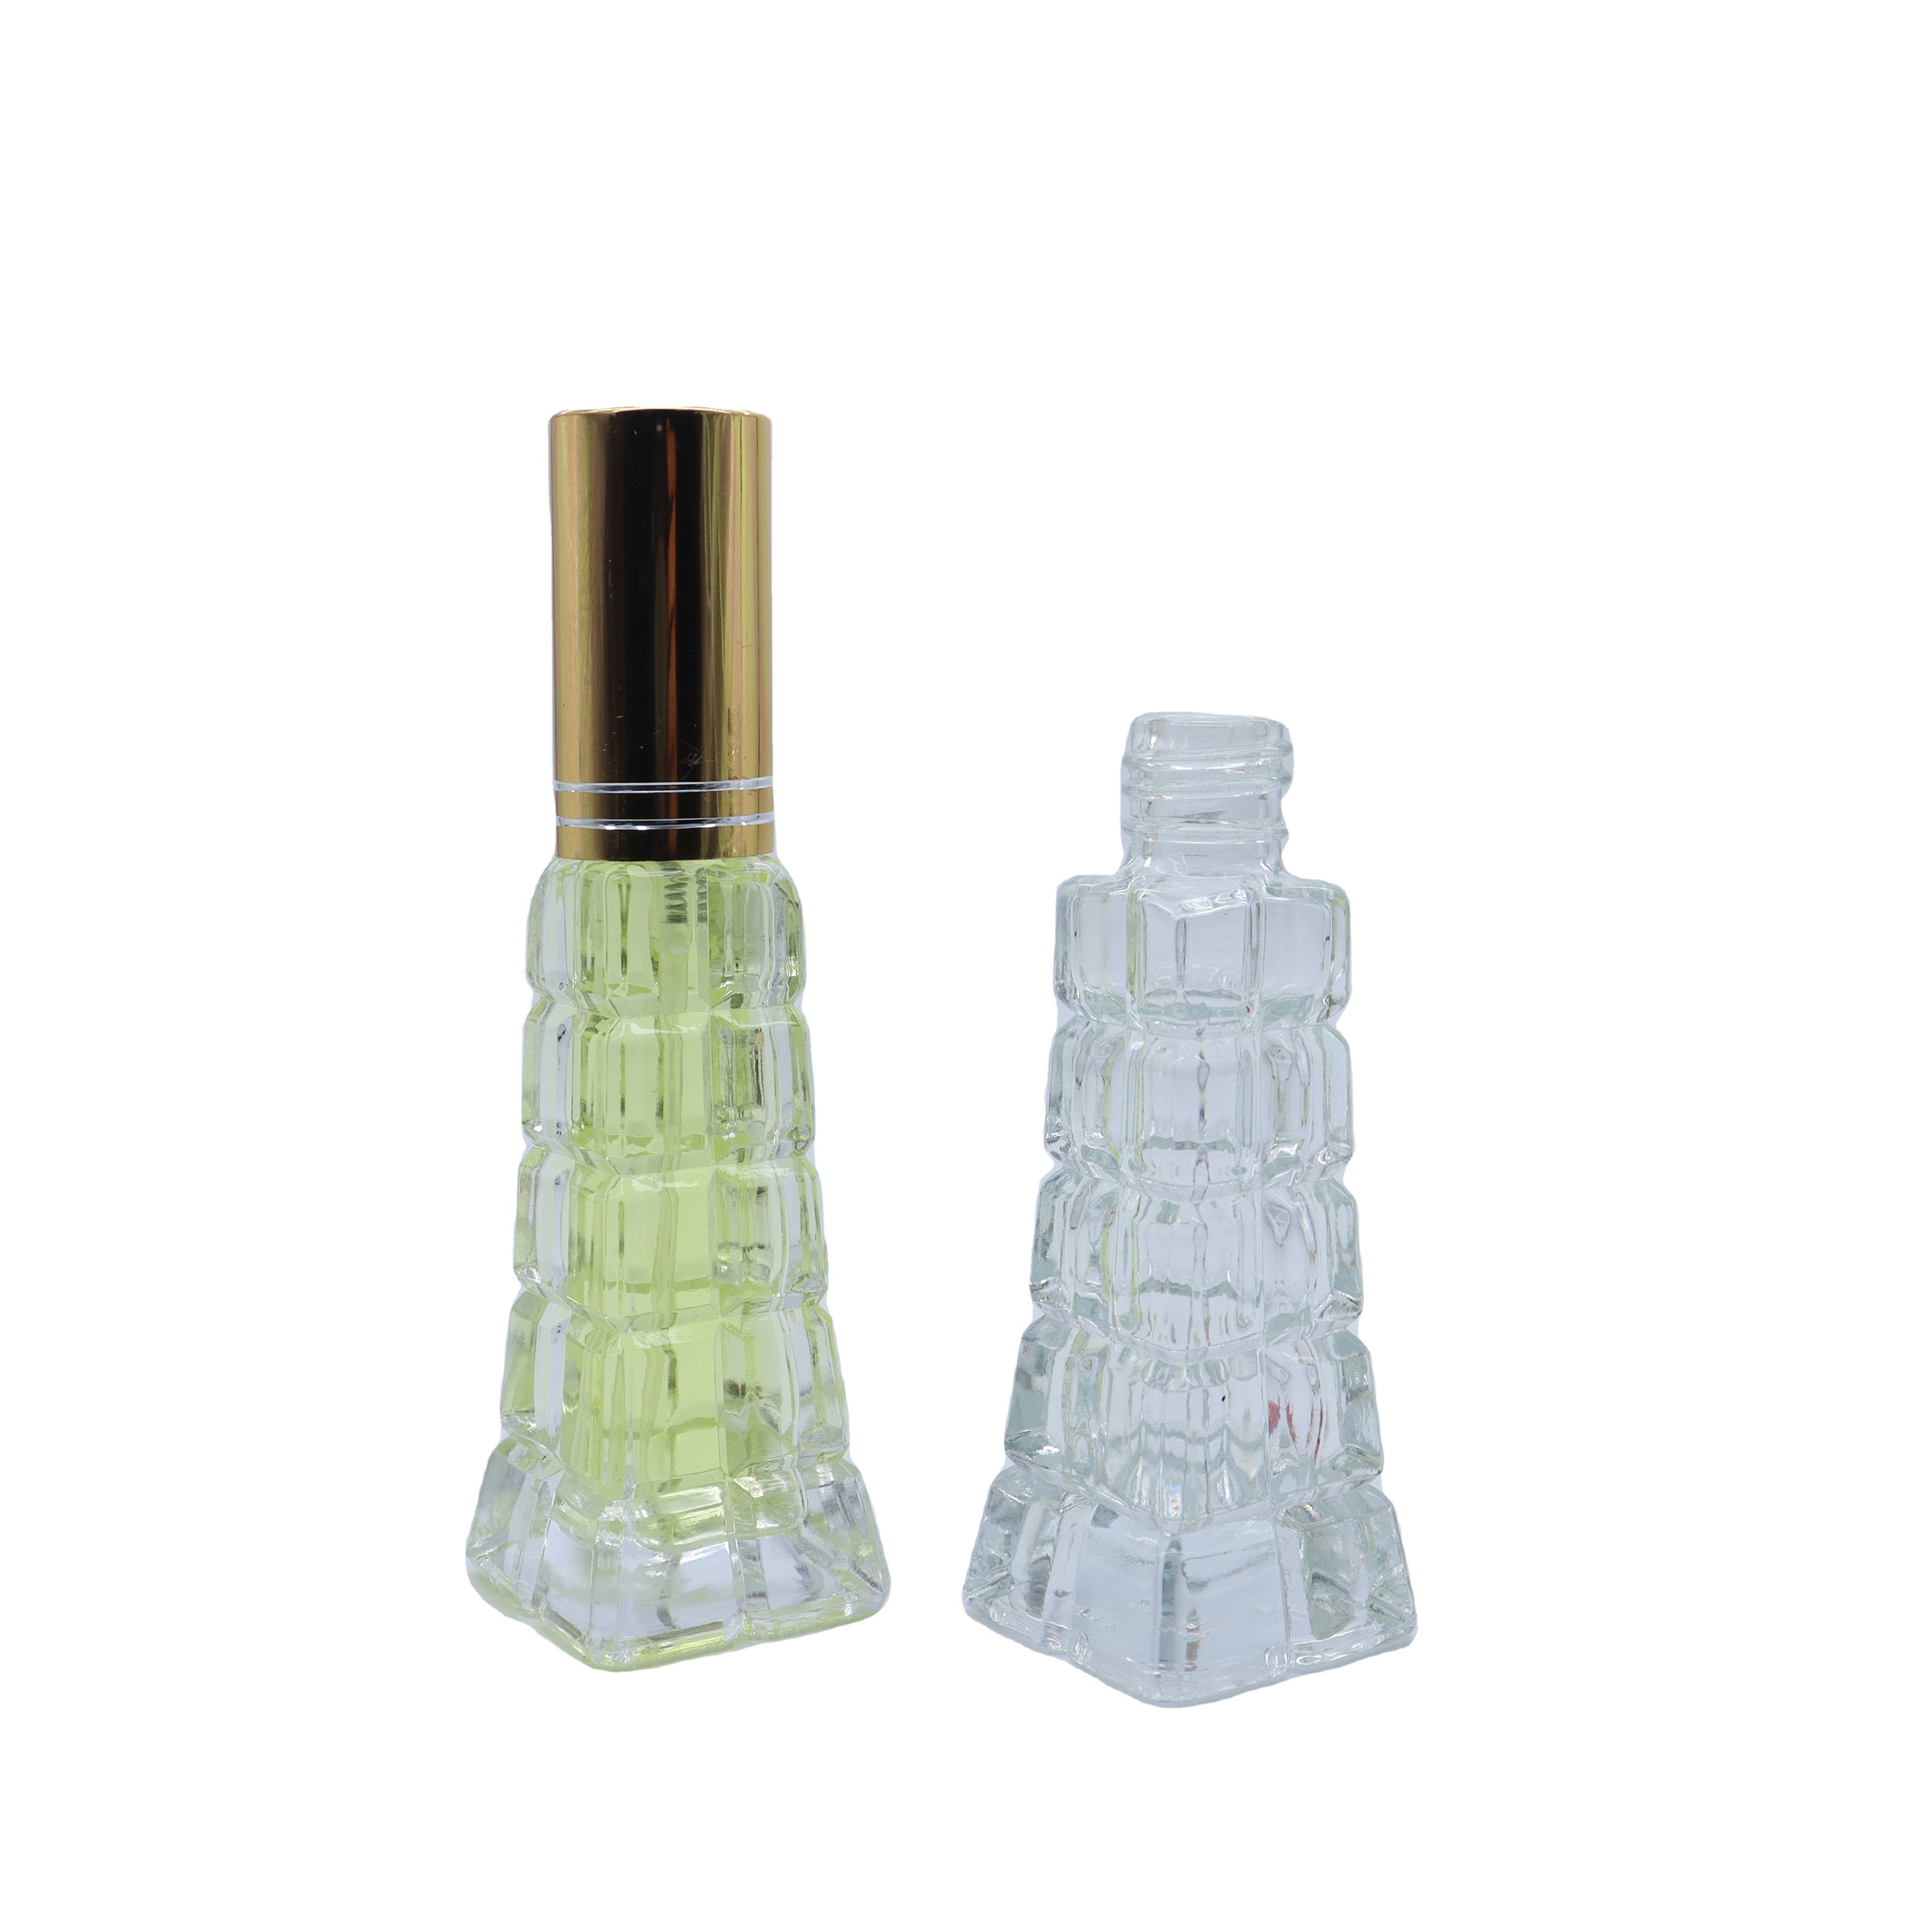 empty perfume bottles small clear perfume bottle modern 25ml glass bottle with pump spray Featured Image